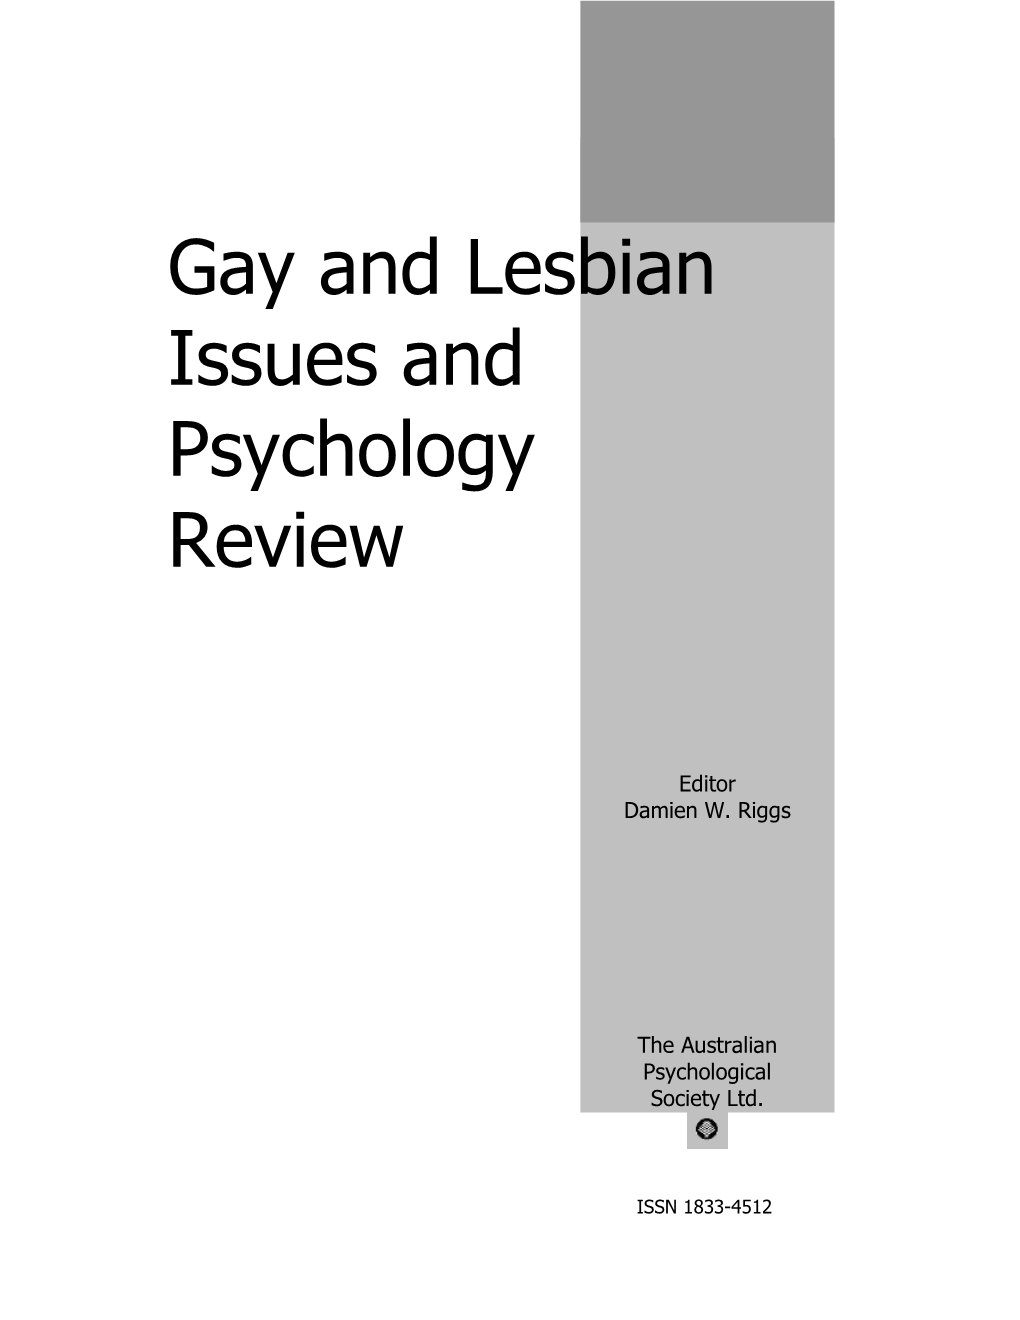 Gay and Lesbian Issues and Psychology Review